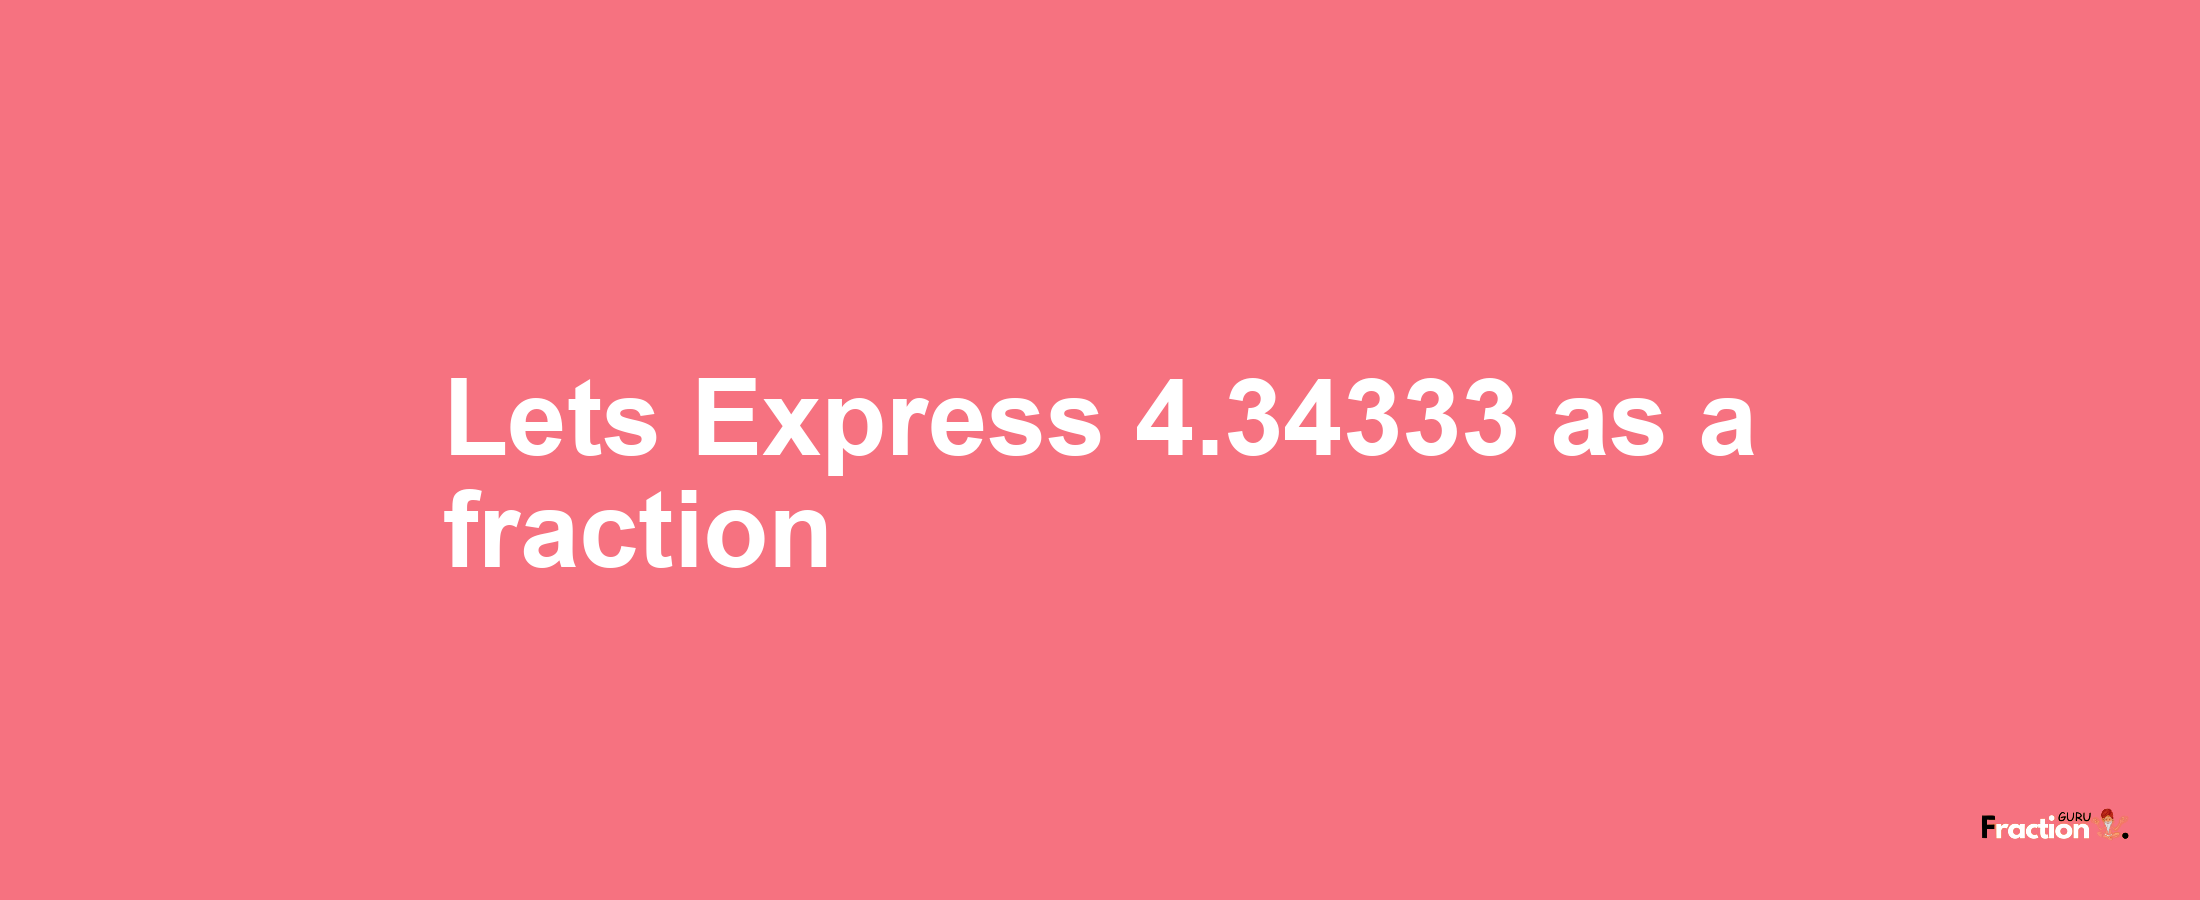 Lets Express 4.34333 as afraction